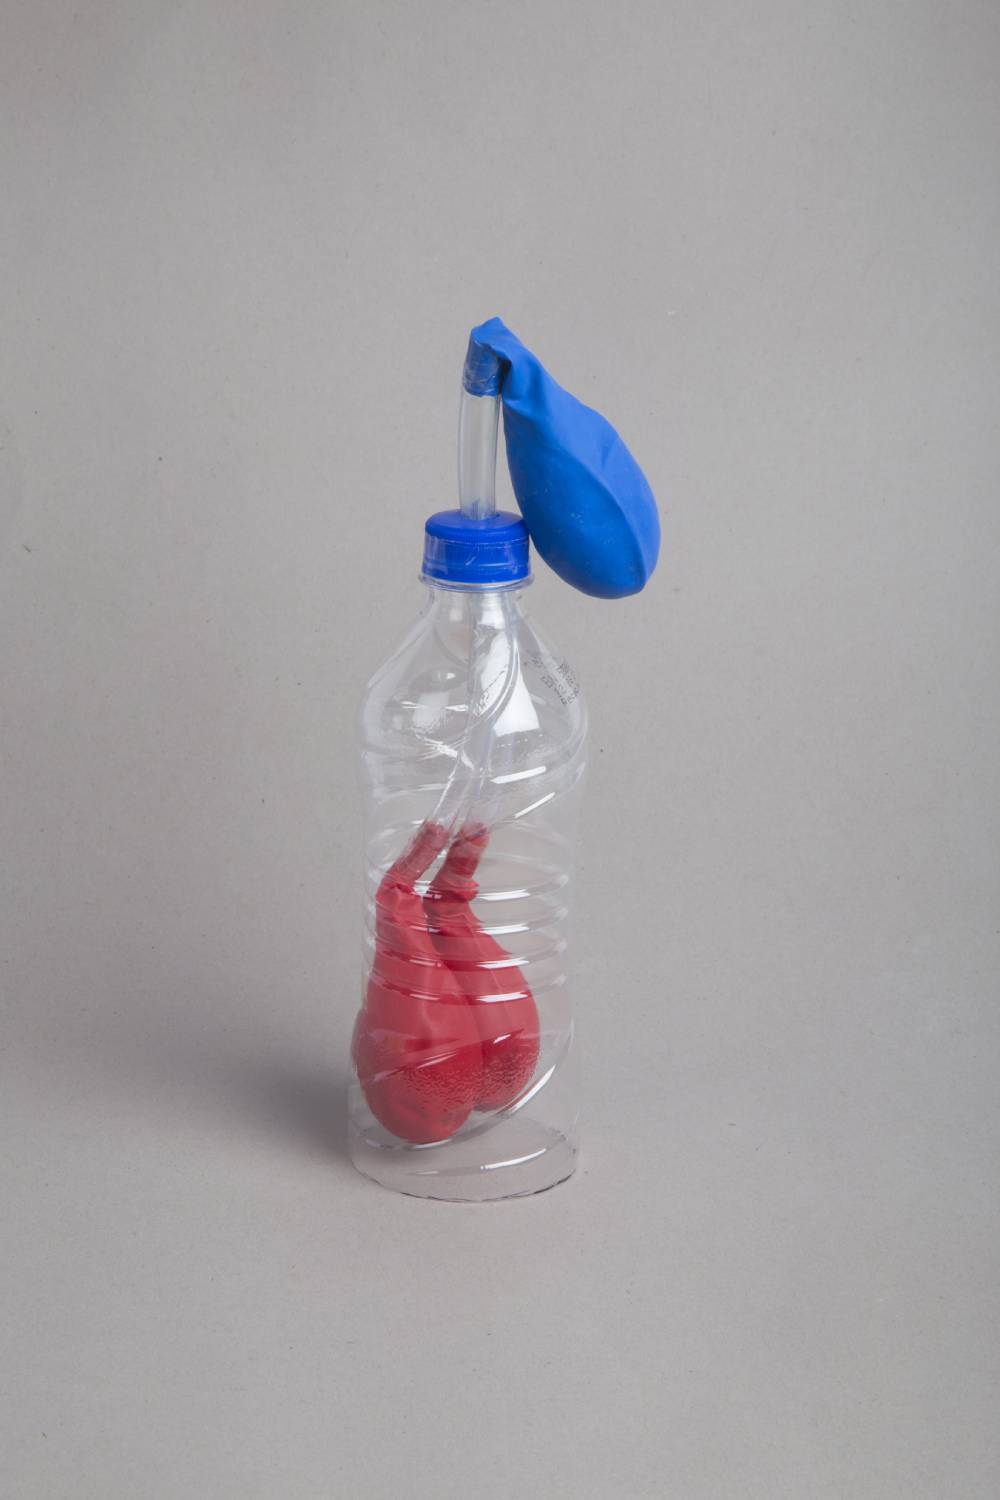 Make a Science Respiratory System Working Model to understand the breathing concepts